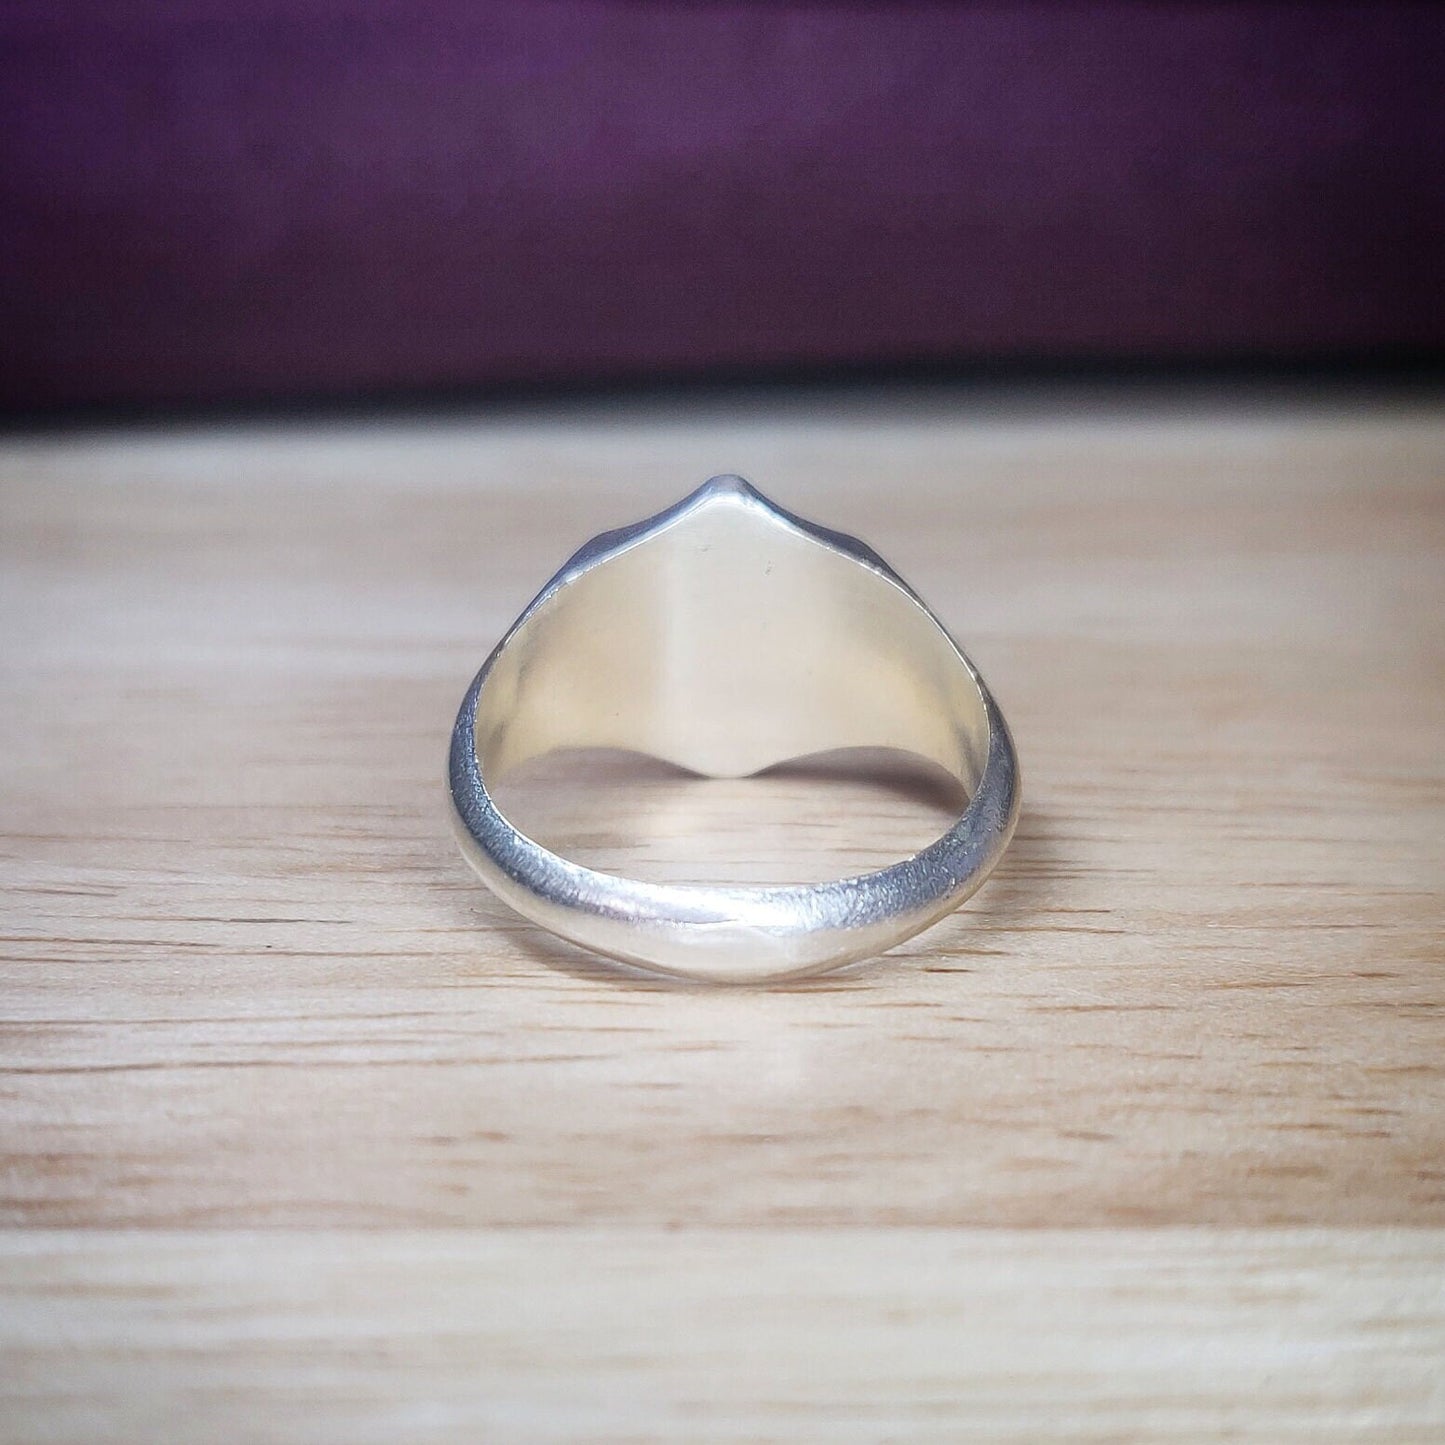 13mm Shield Signet Ring. Blank Mens or Womens Signet Ring for Jewelry Making, Engraving and Gem setting in Silver or 9ct Yellow Gold